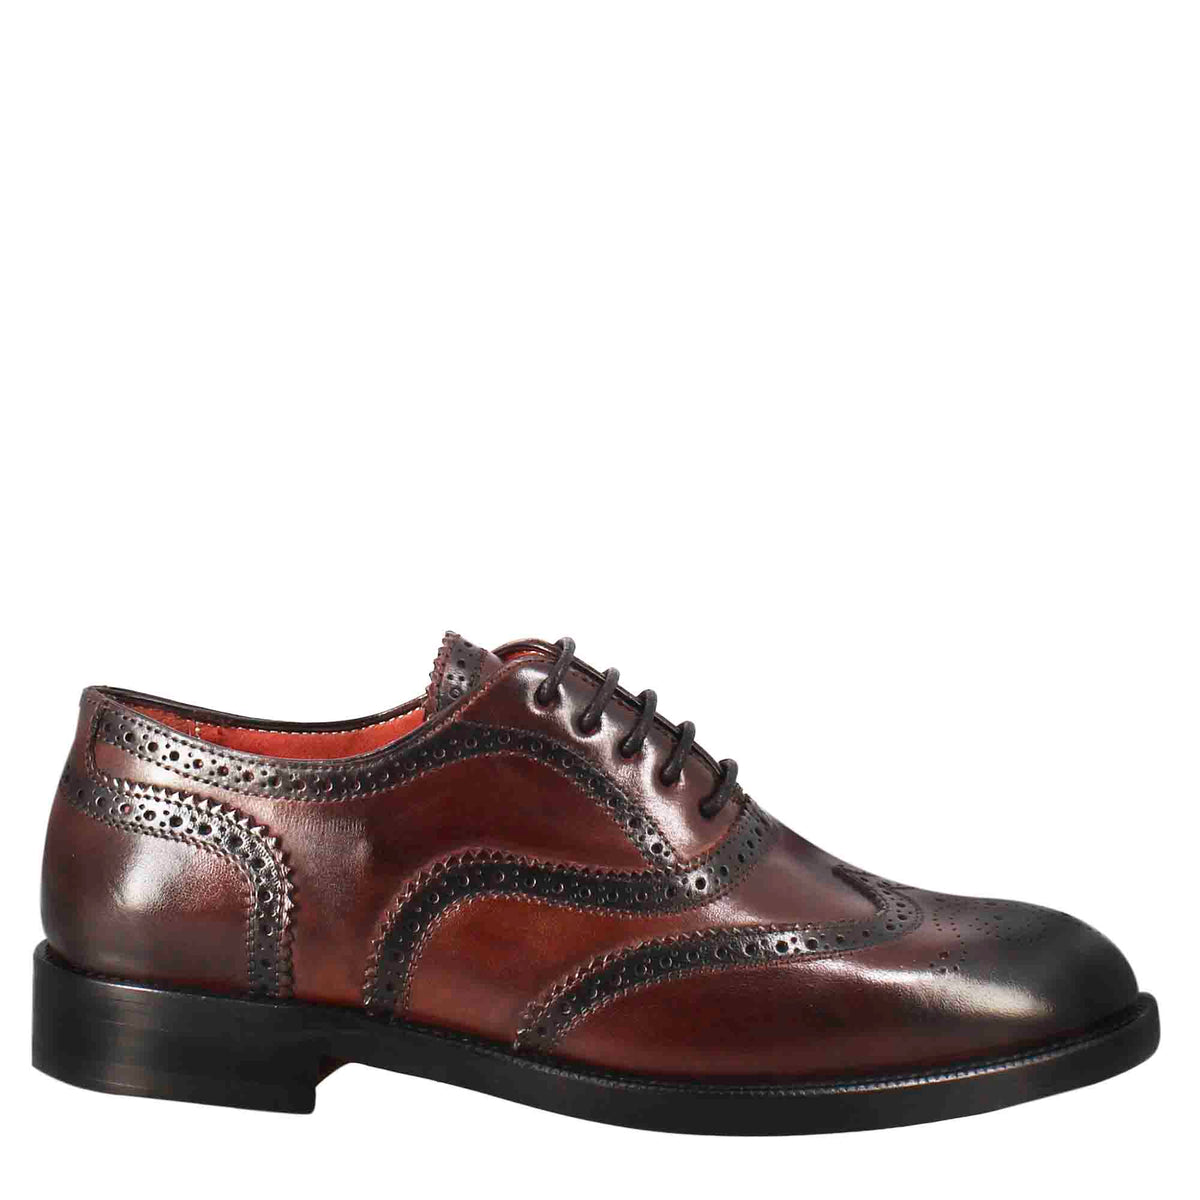 Women's brogue effect brogue shoes in burgundy leather